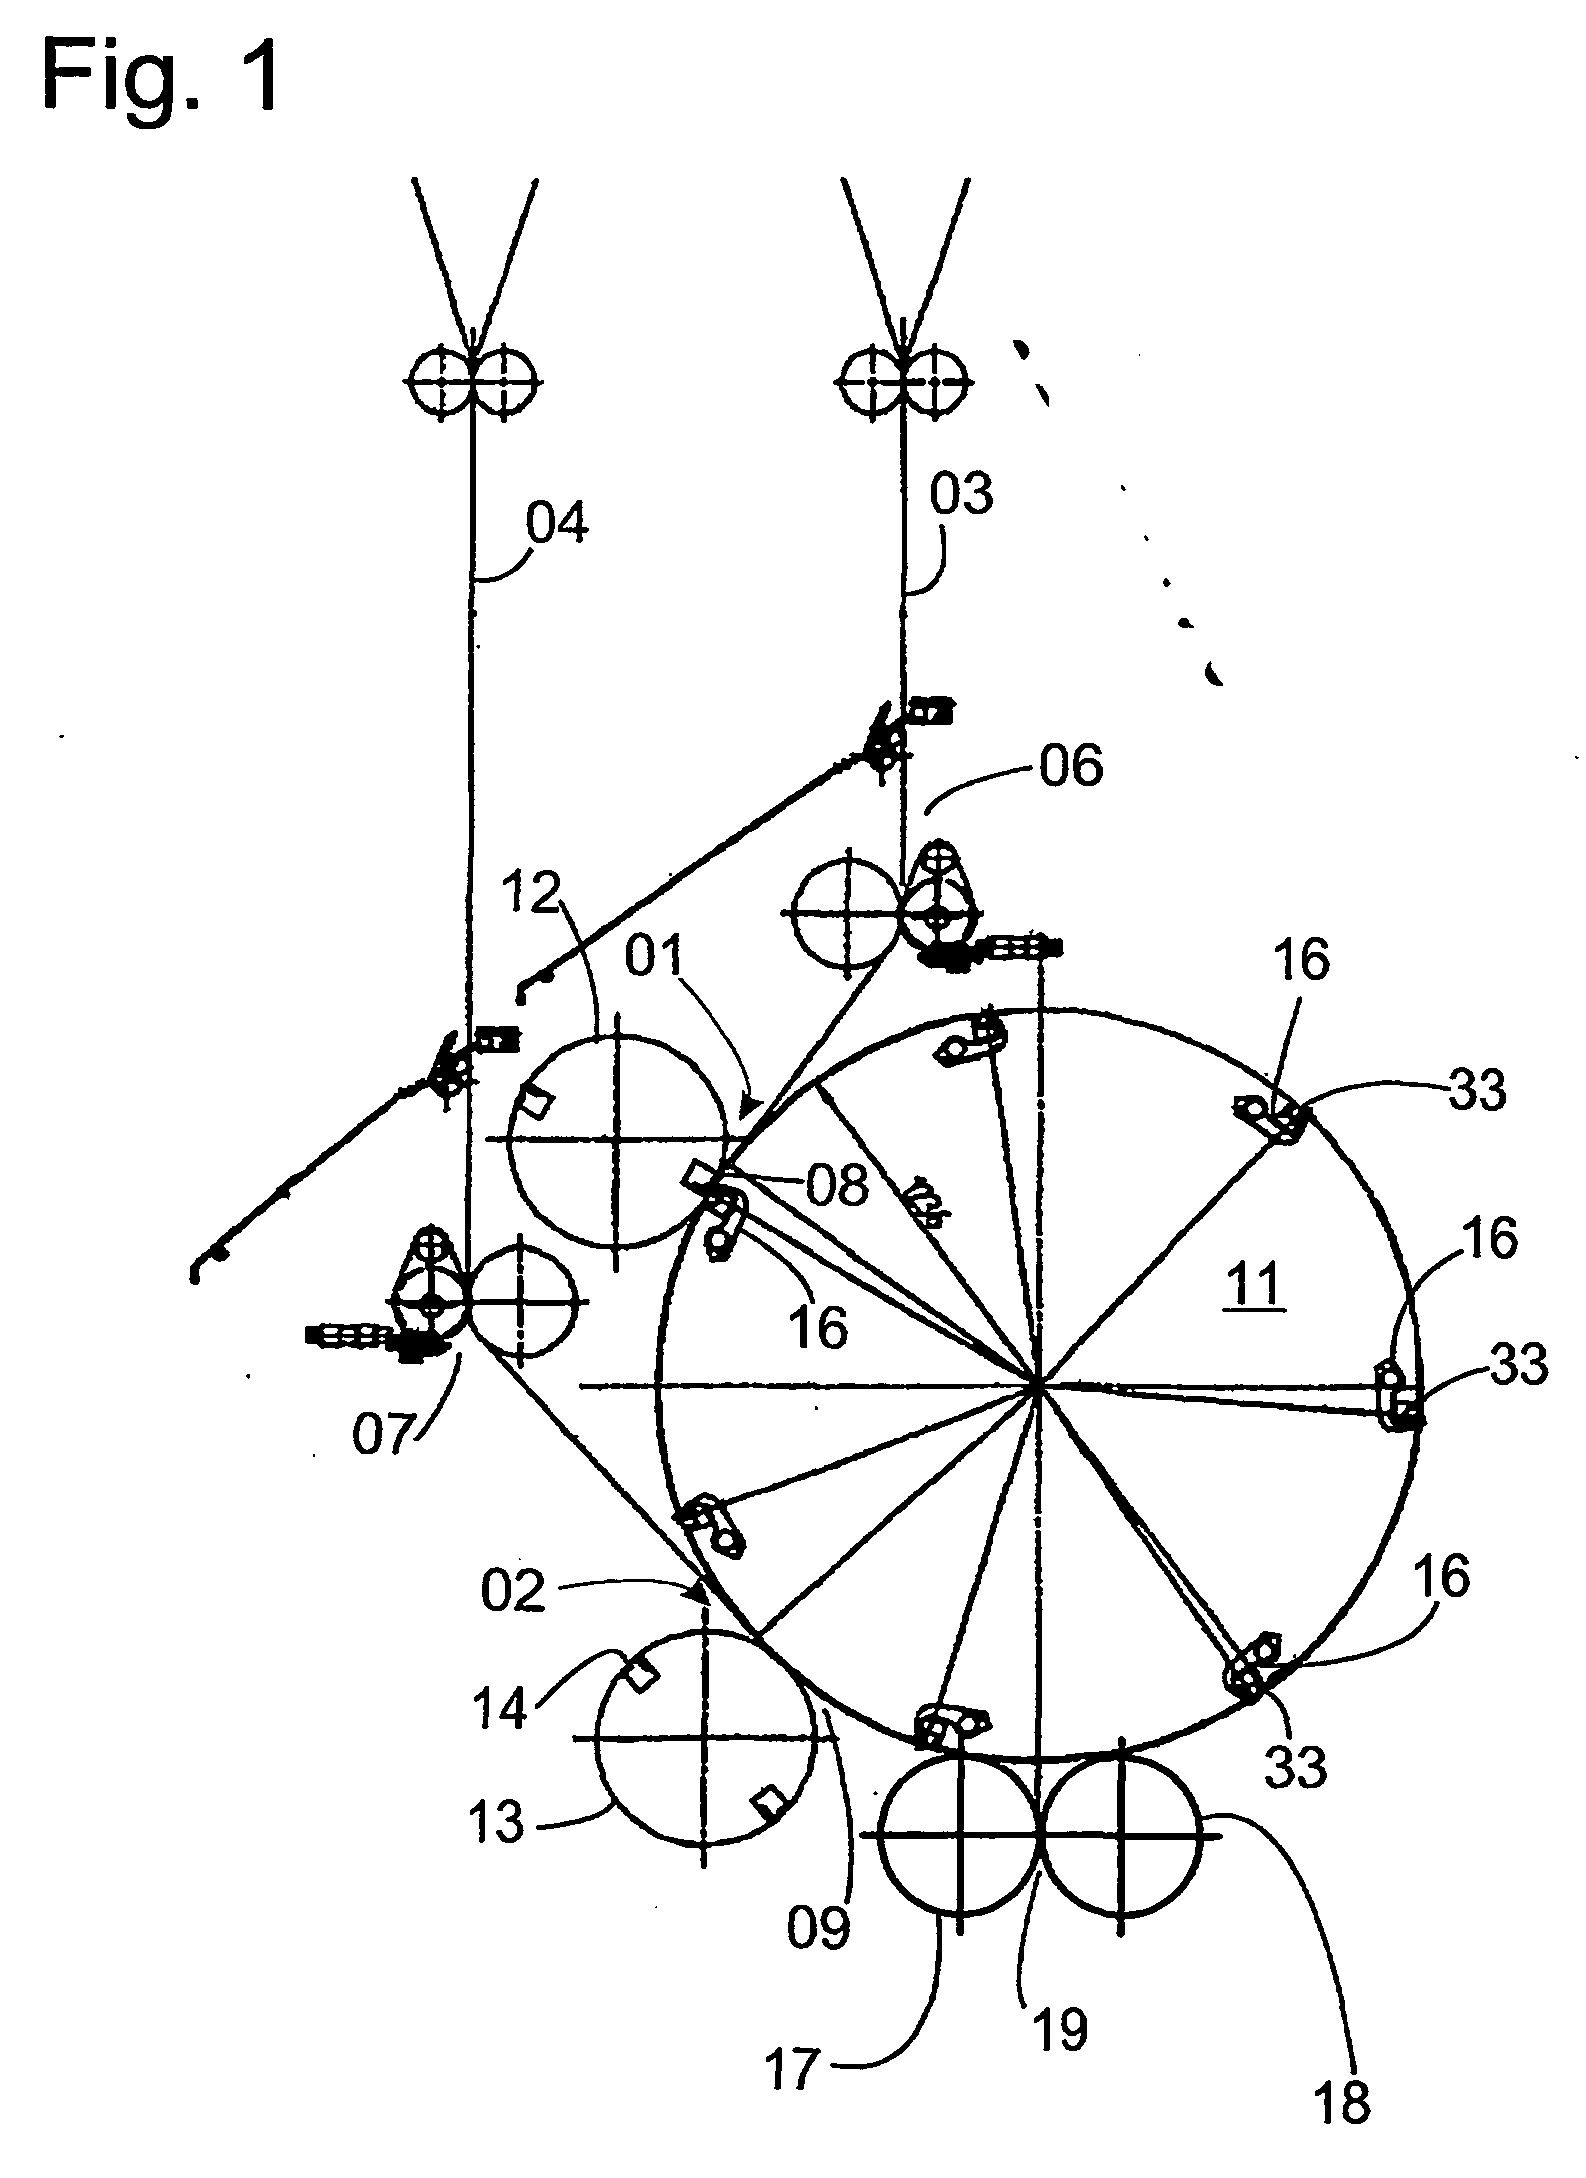 Rotary folder comprising a cutting device for cross-cutting at least one web